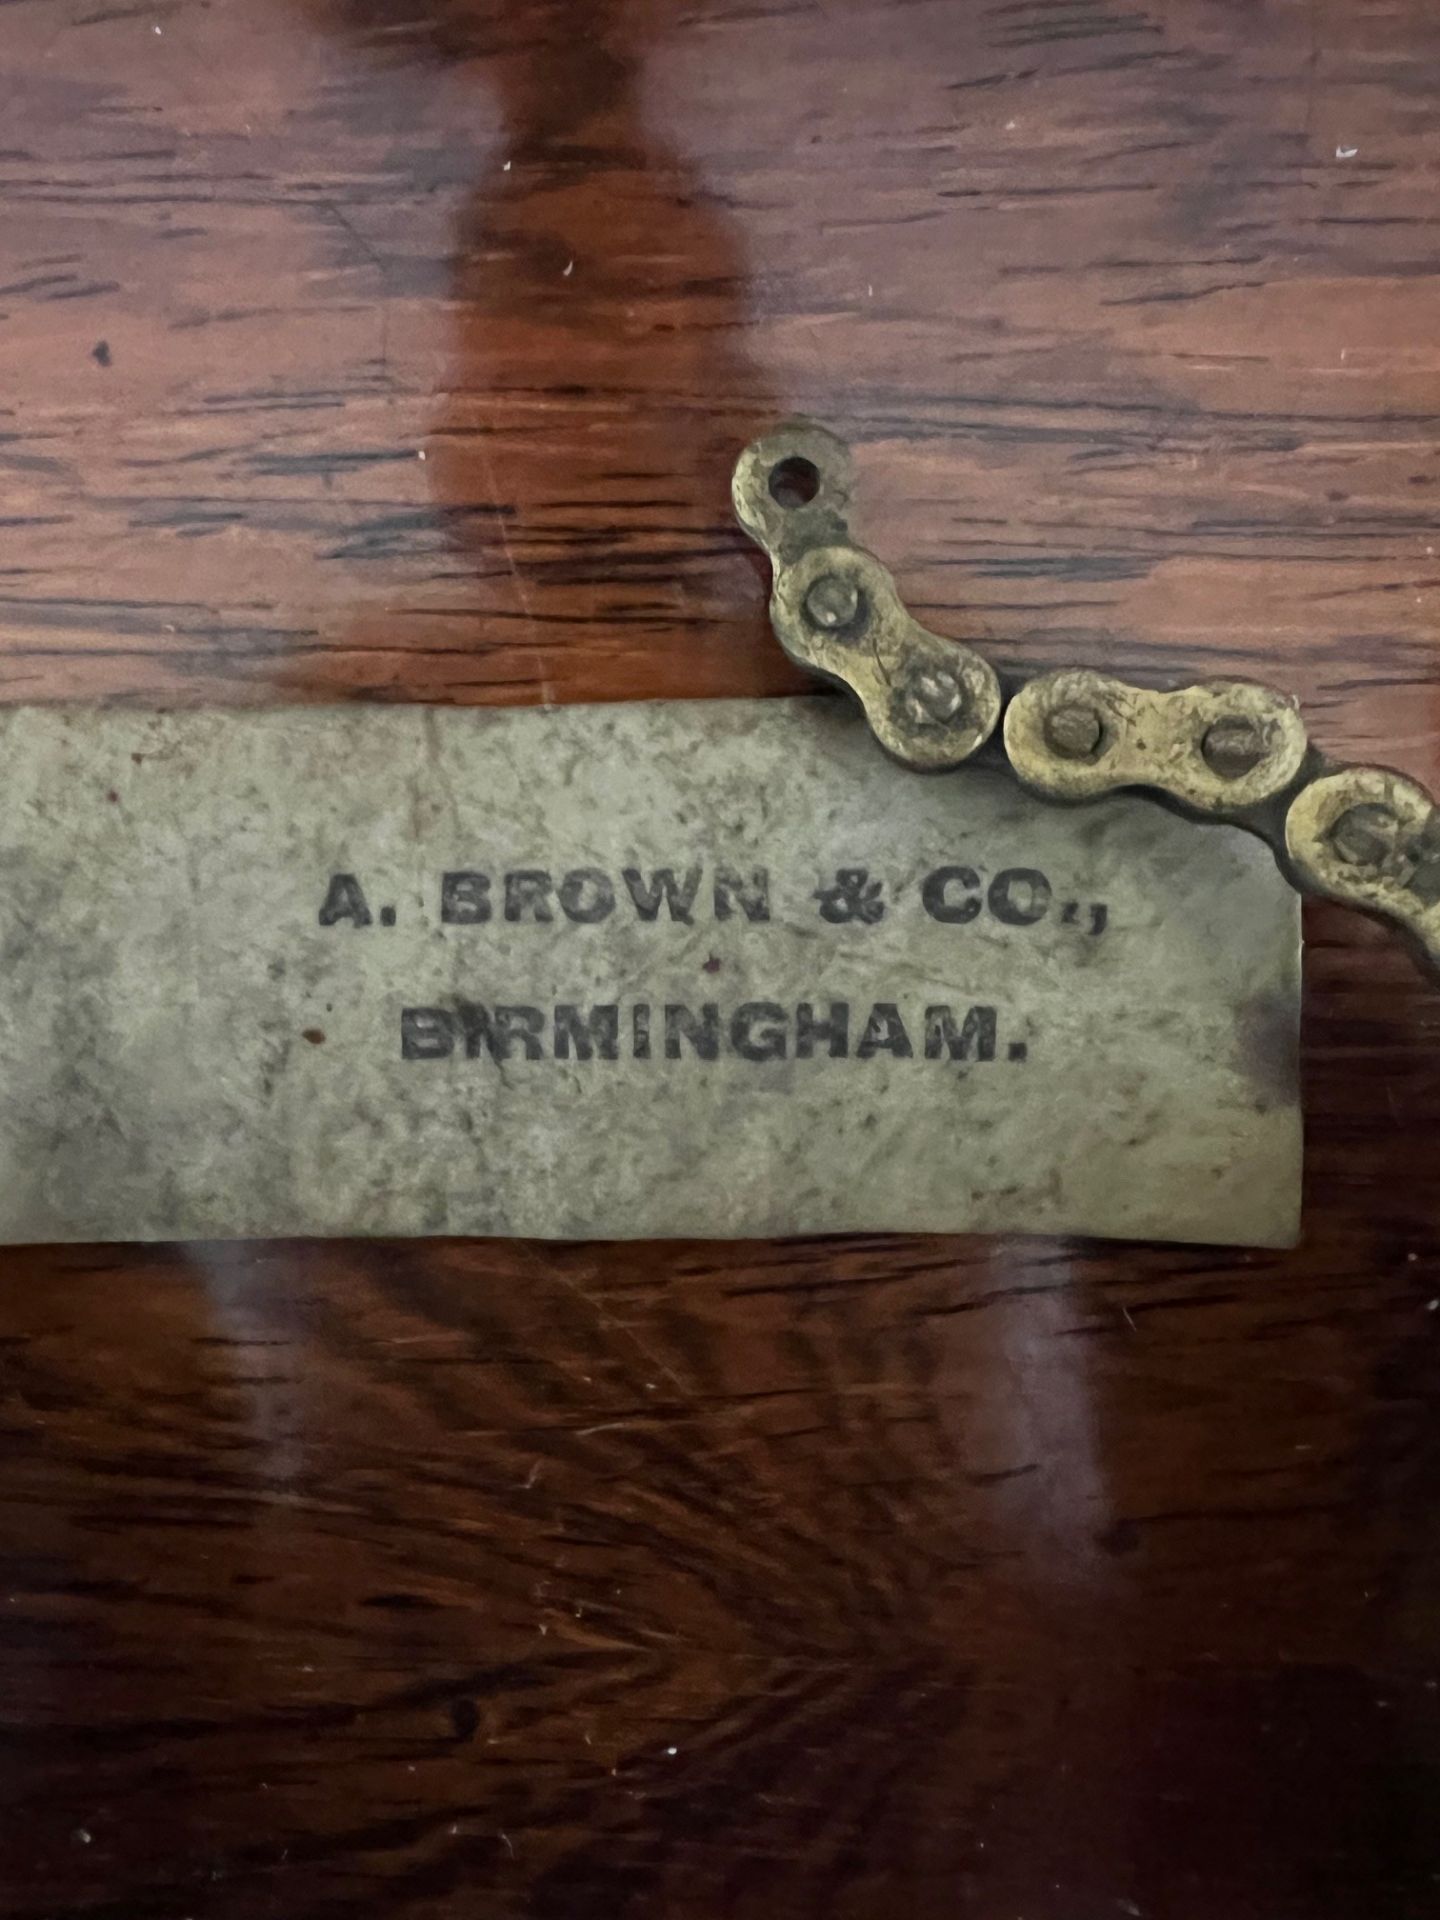 FIVE UNUSED ORNATE SOLID BRASS BELL PULLS INCLUDING LABEL, A BROWN CO BIRMINGHAM - Image 6 of 6